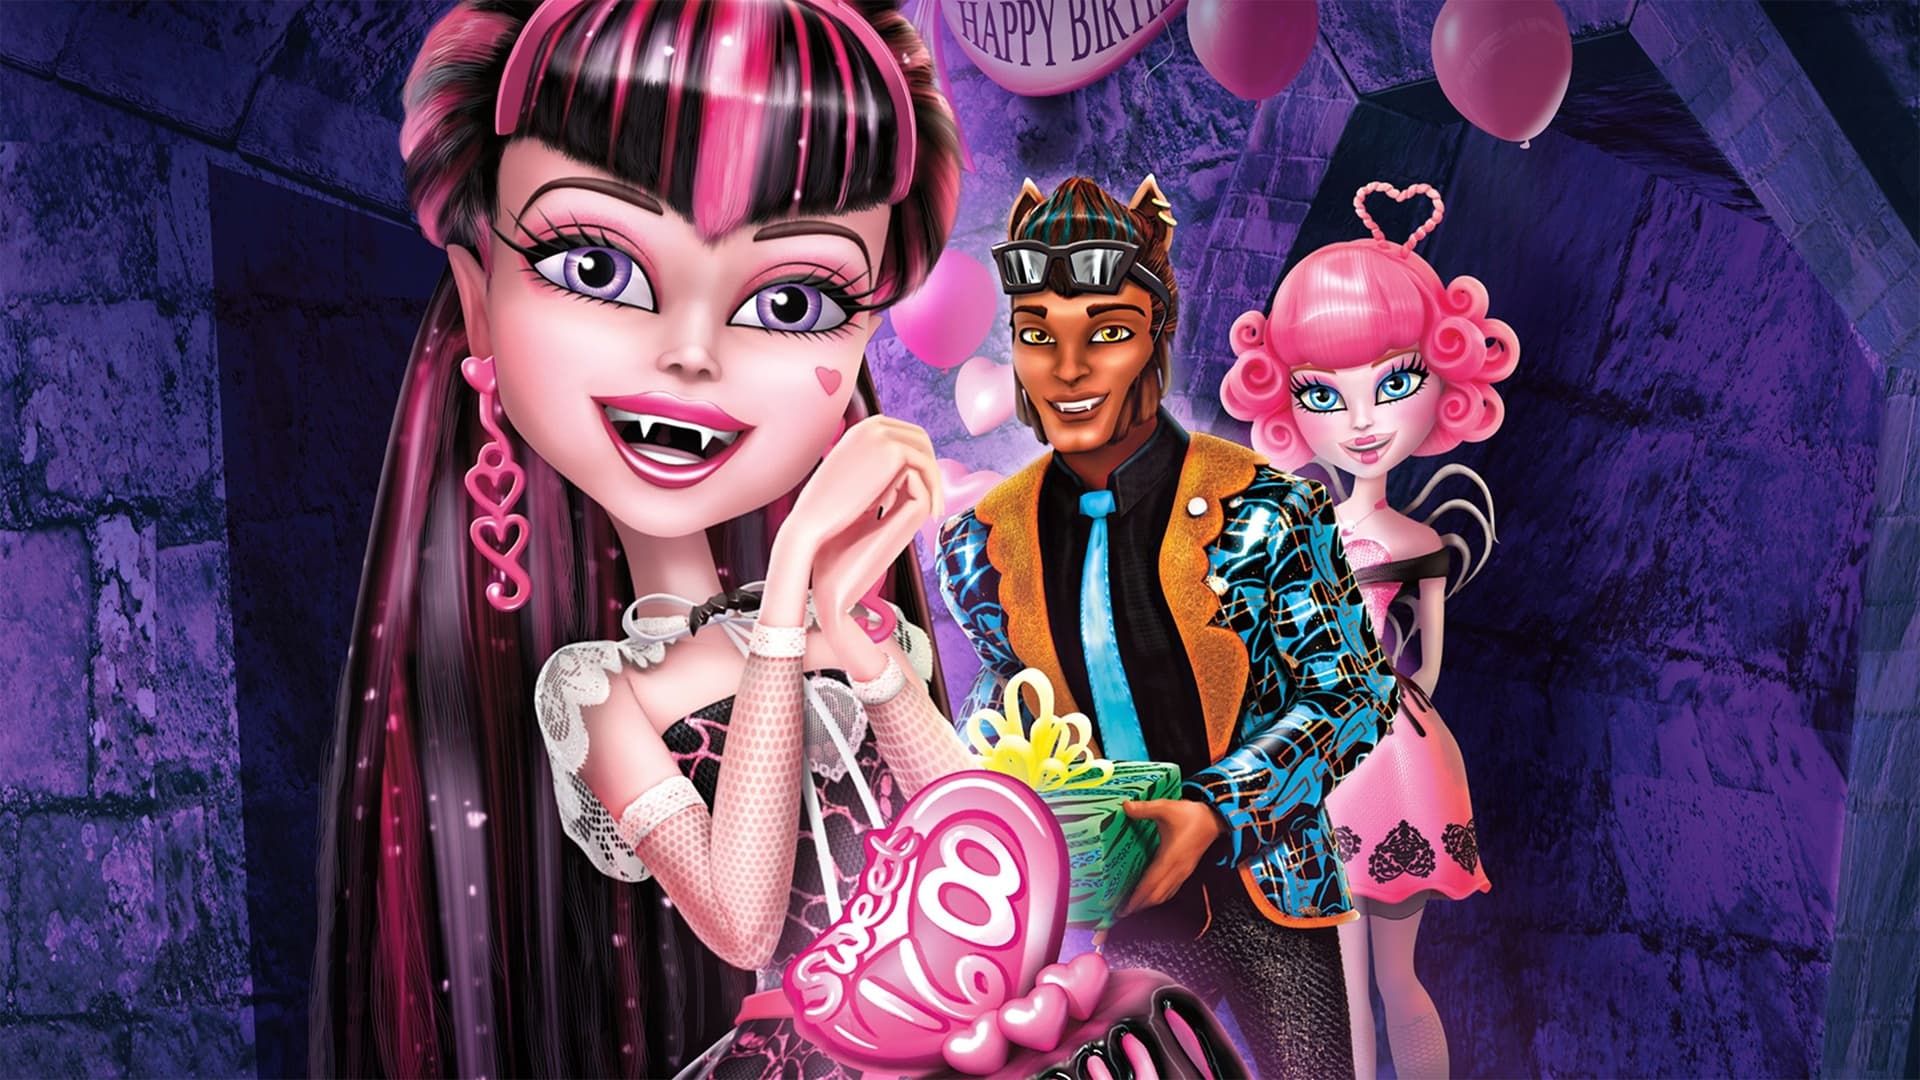 Monster High: Why Do Ghouls Fall in Love? background